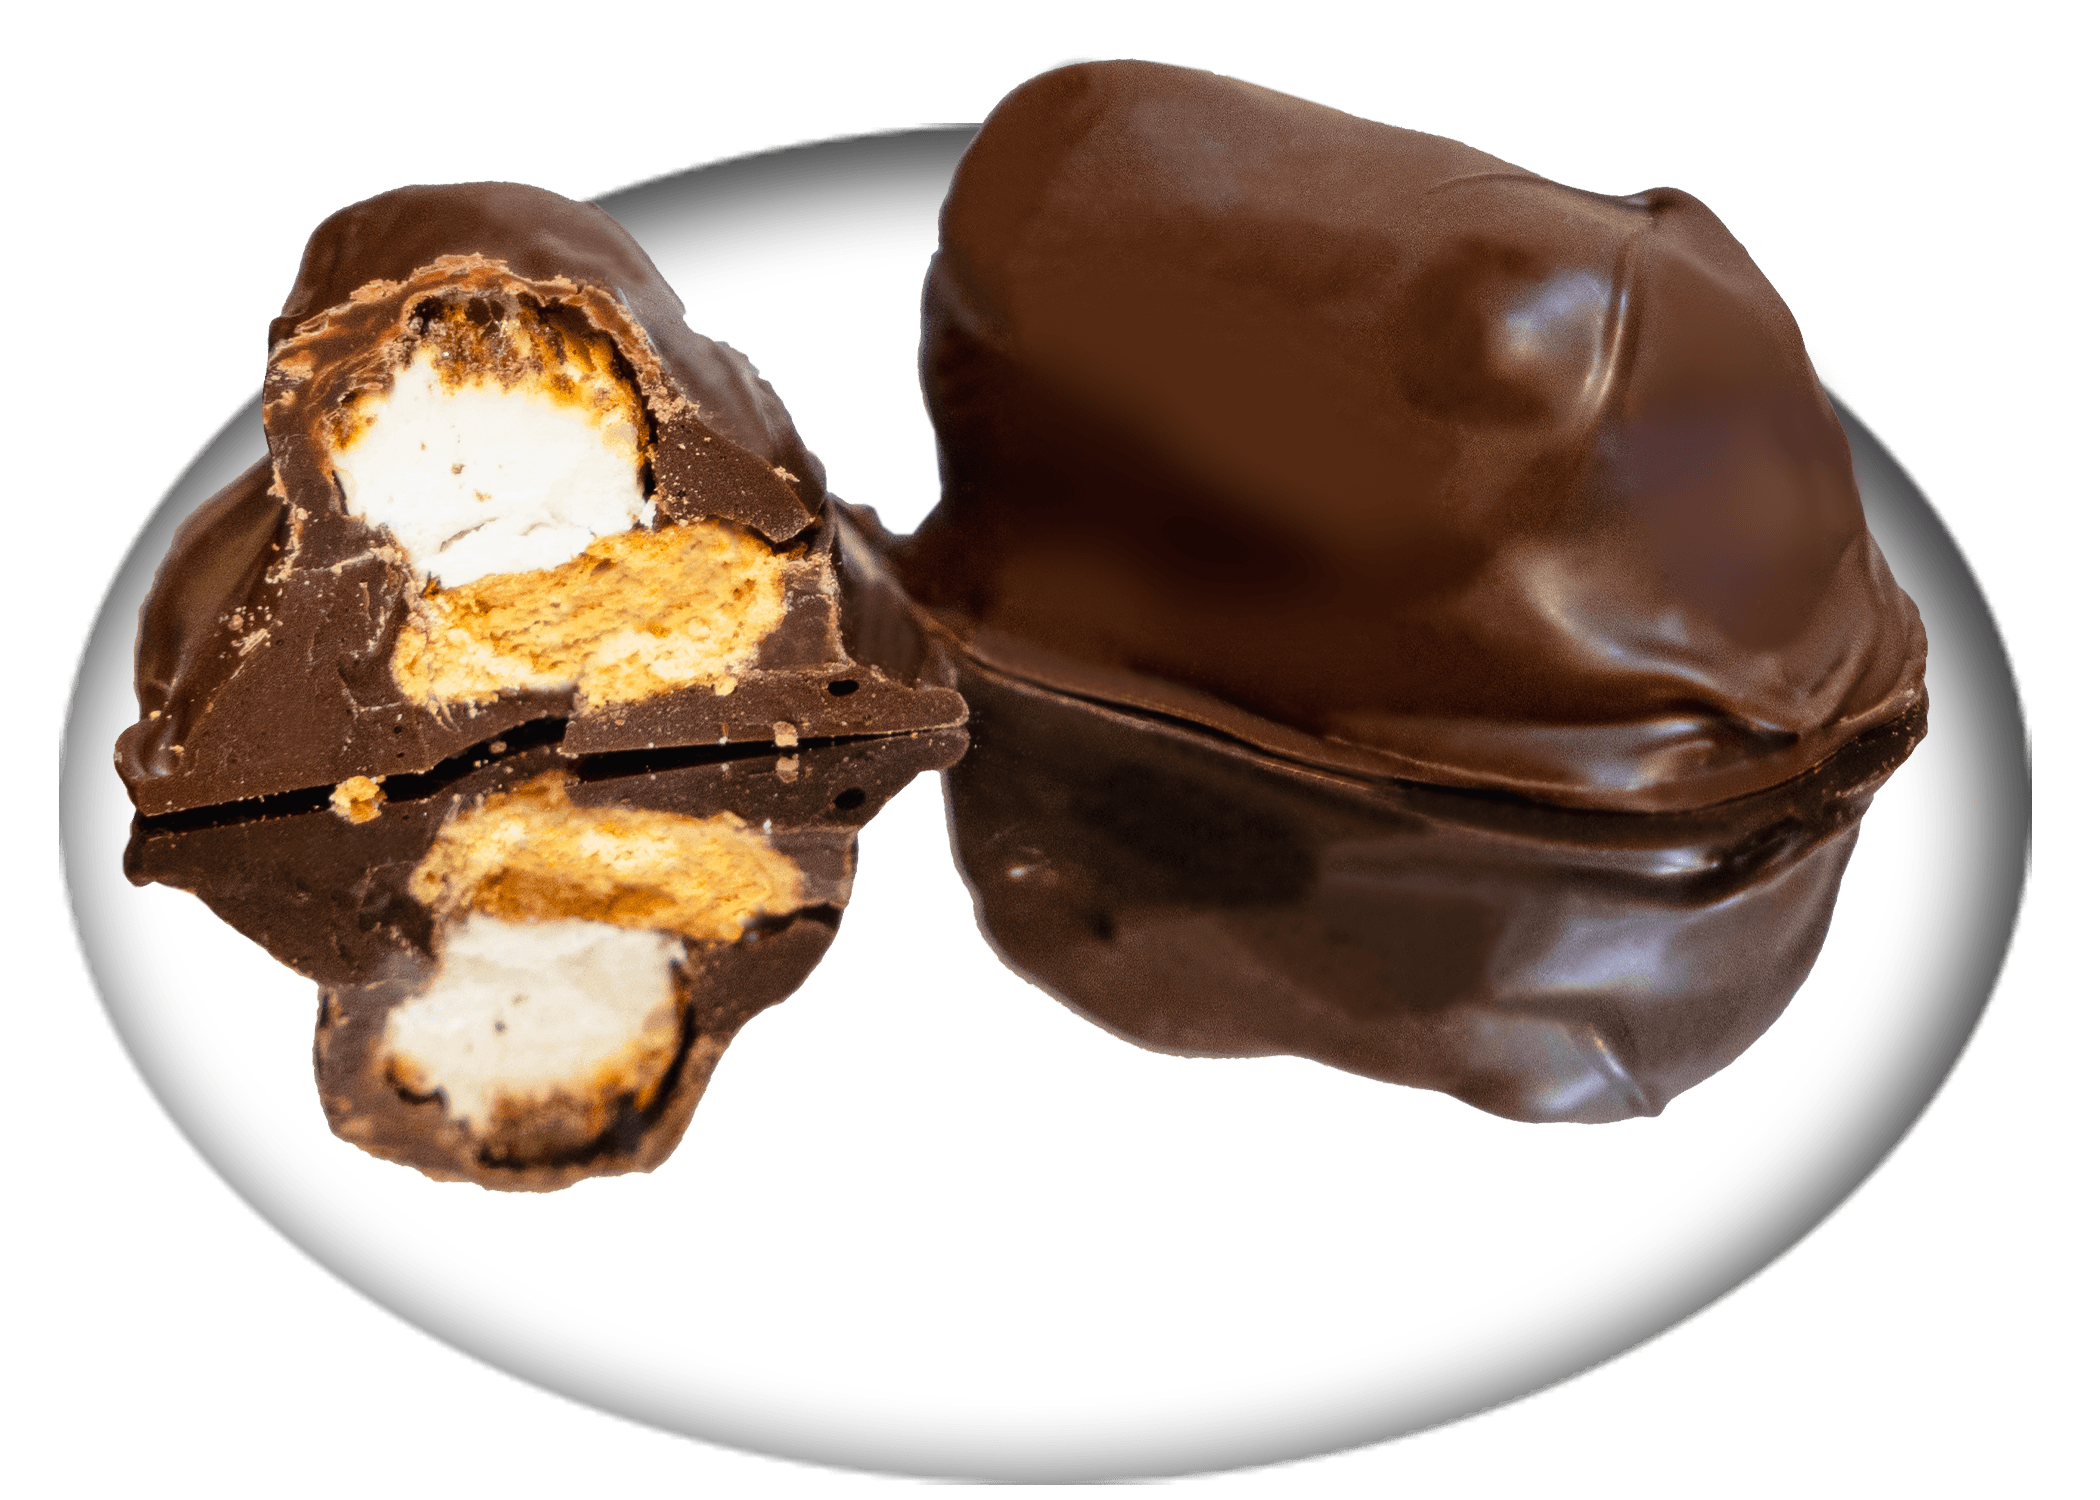 Chocolate Covered Everything — campers - Dark chocolate middled with toasted marshmallow covered graham crackers. Also known as s'mores. Shipping, delivery, and pick up. Place your order!